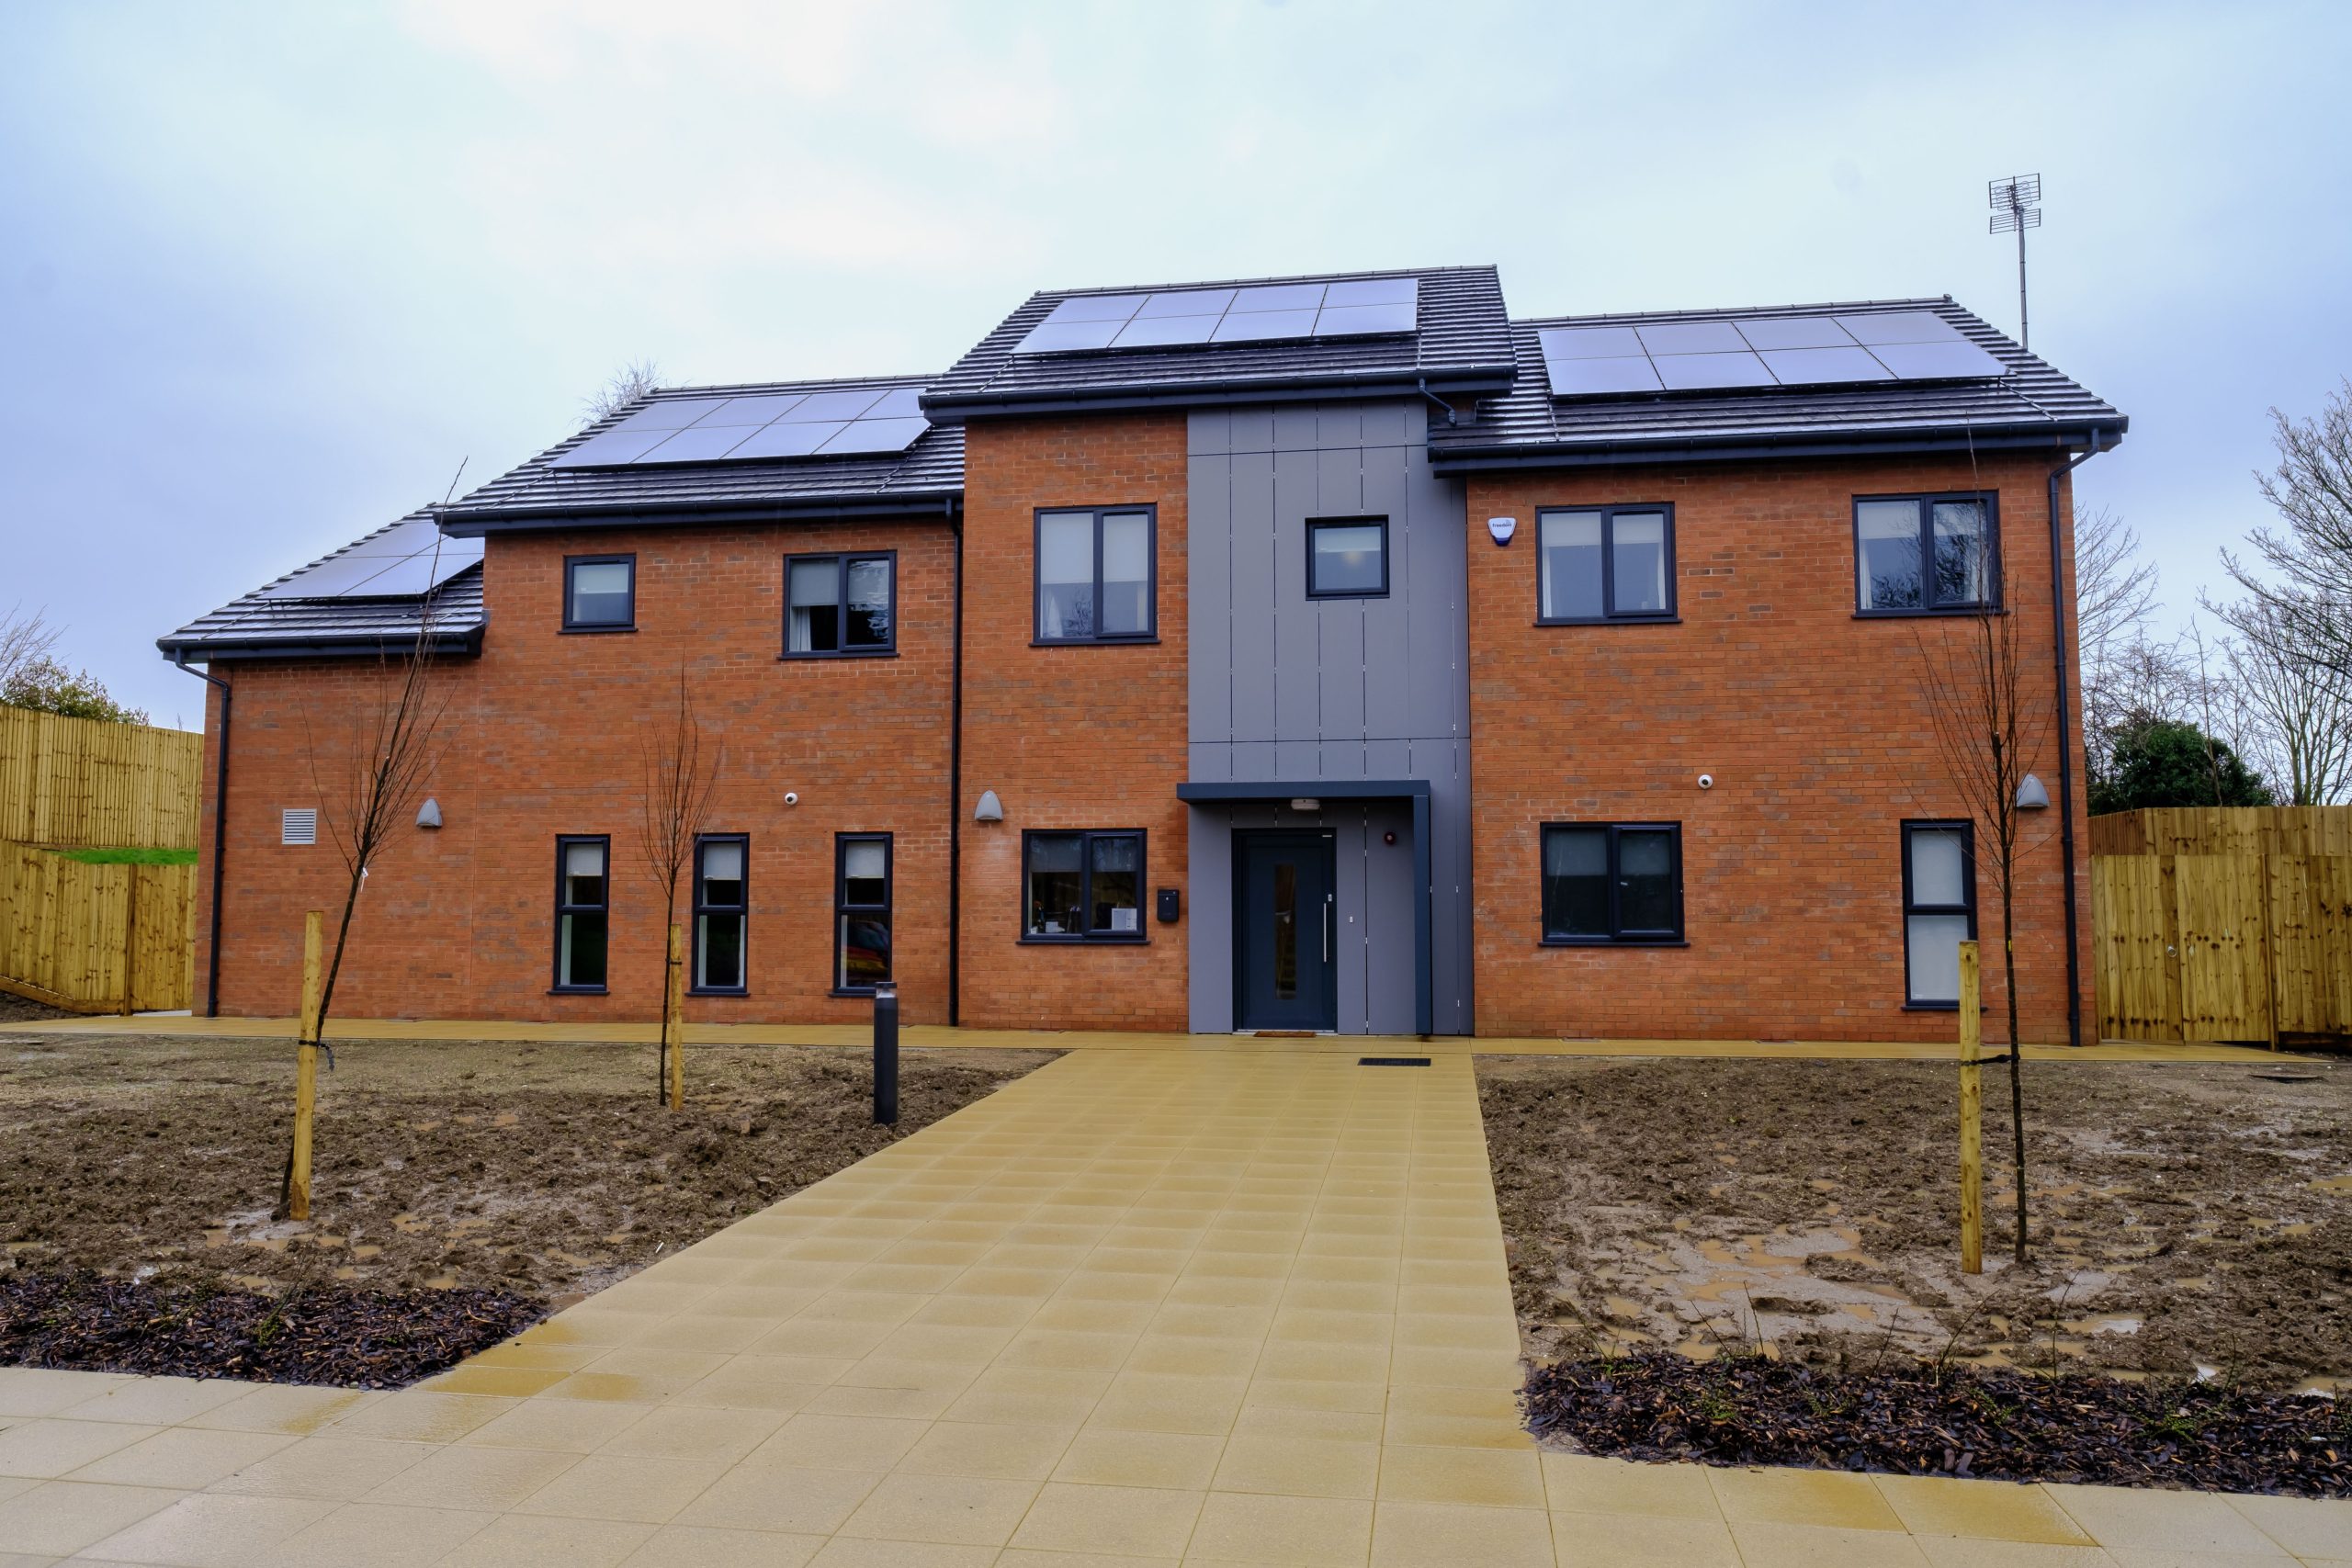 Lindum delivers new care accommodation for Lincolnshire children to call home